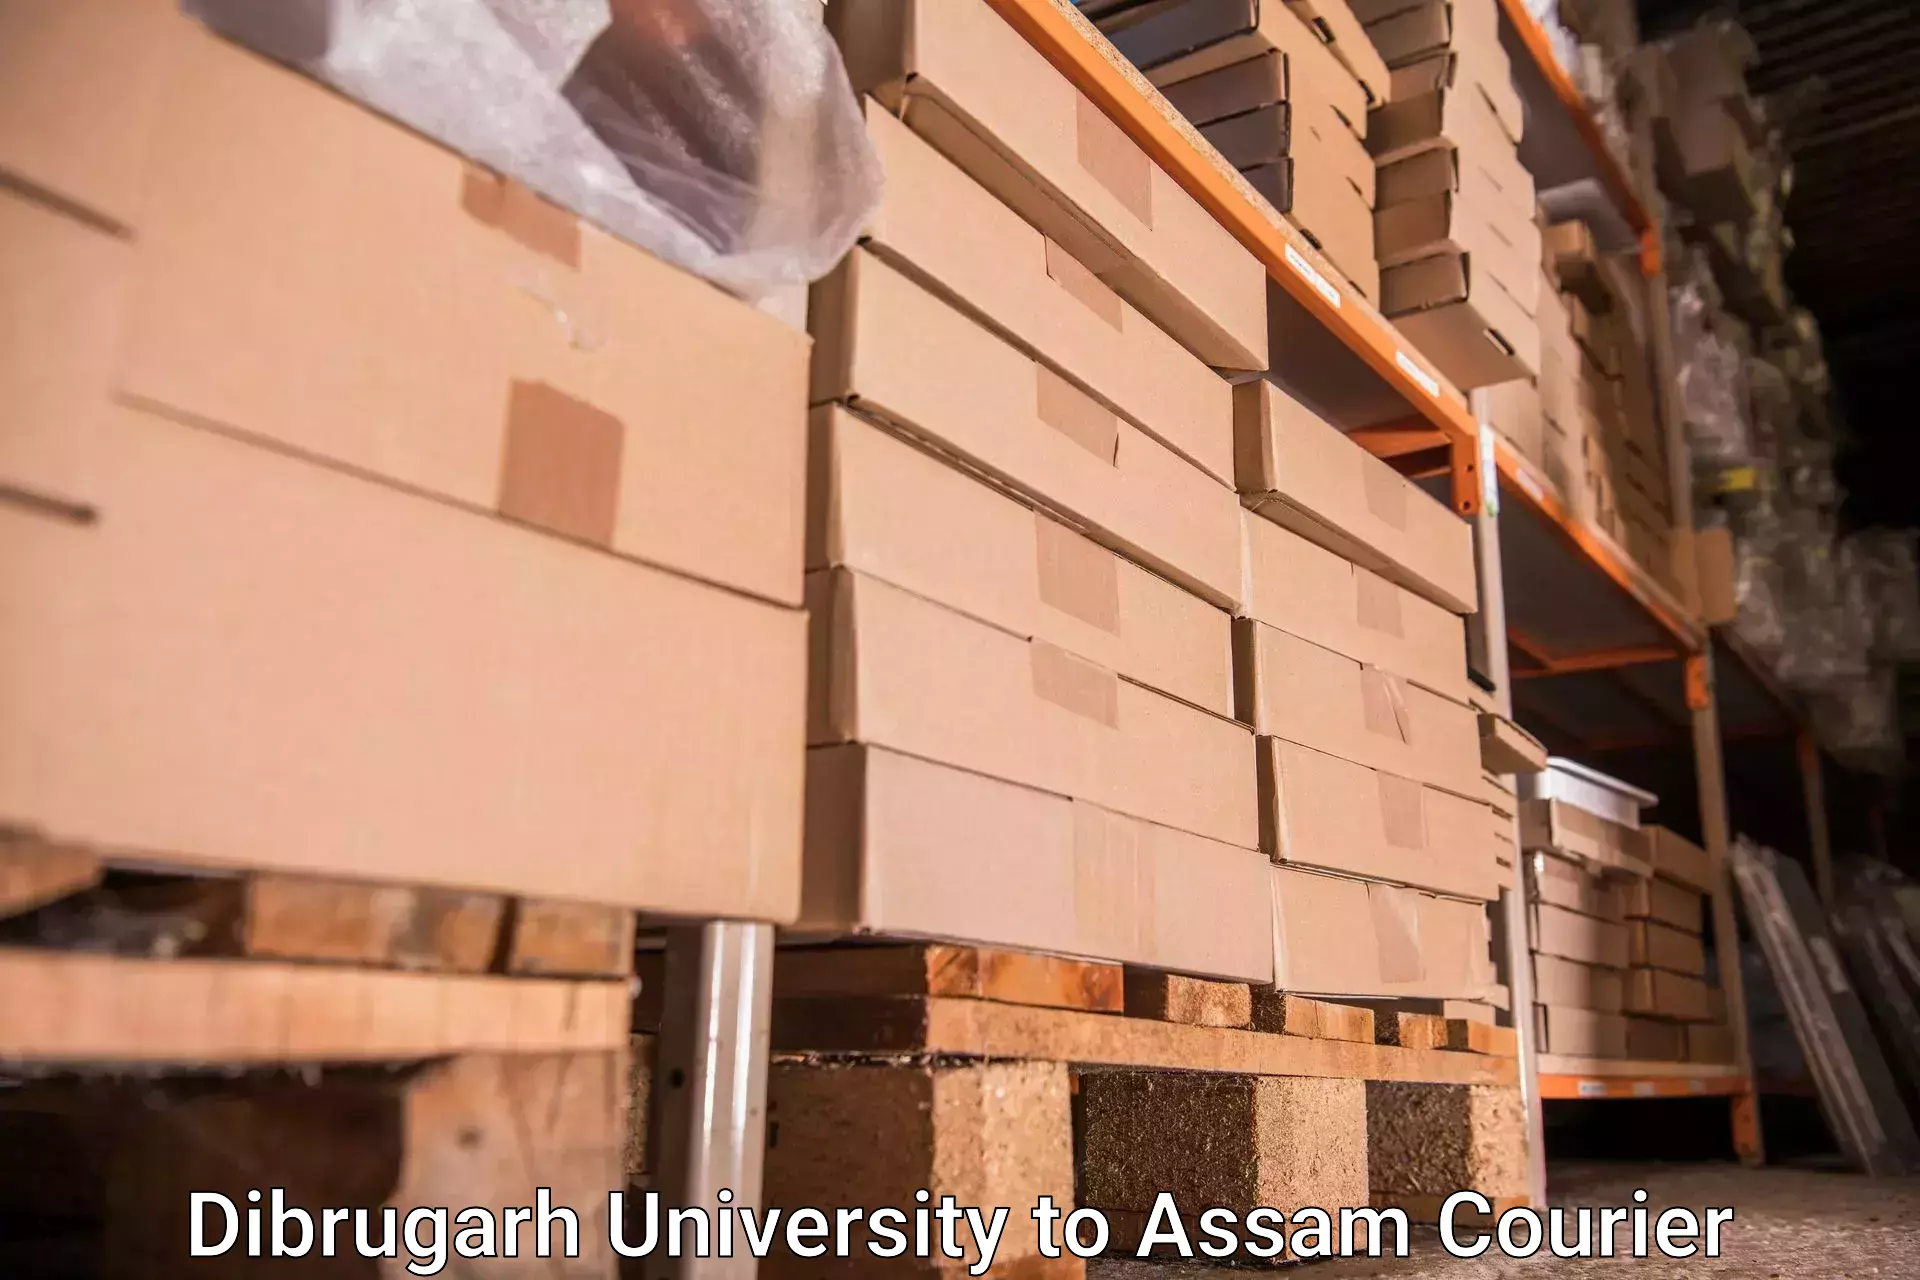 Baggage shipping quotes in Dibrugarh University to Kamrup